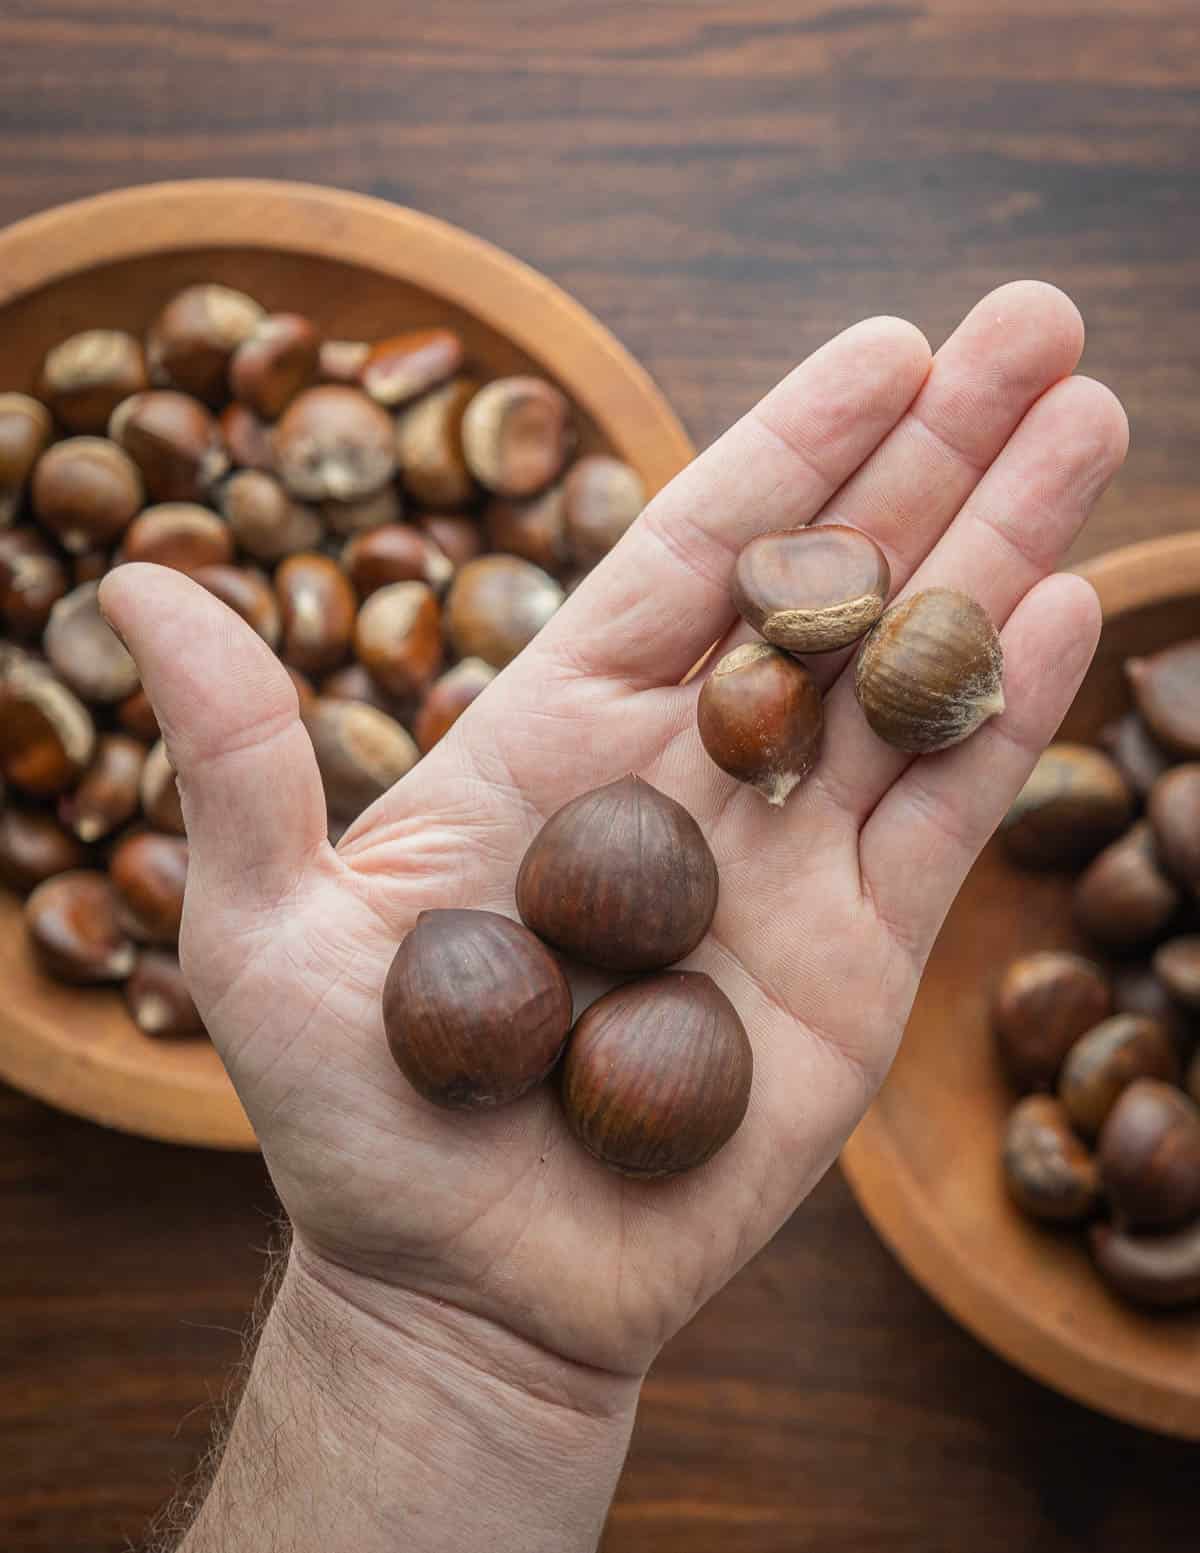 A comparison of Chinese and Italian chestnuts shown in a hand above bowls of chestnuts.